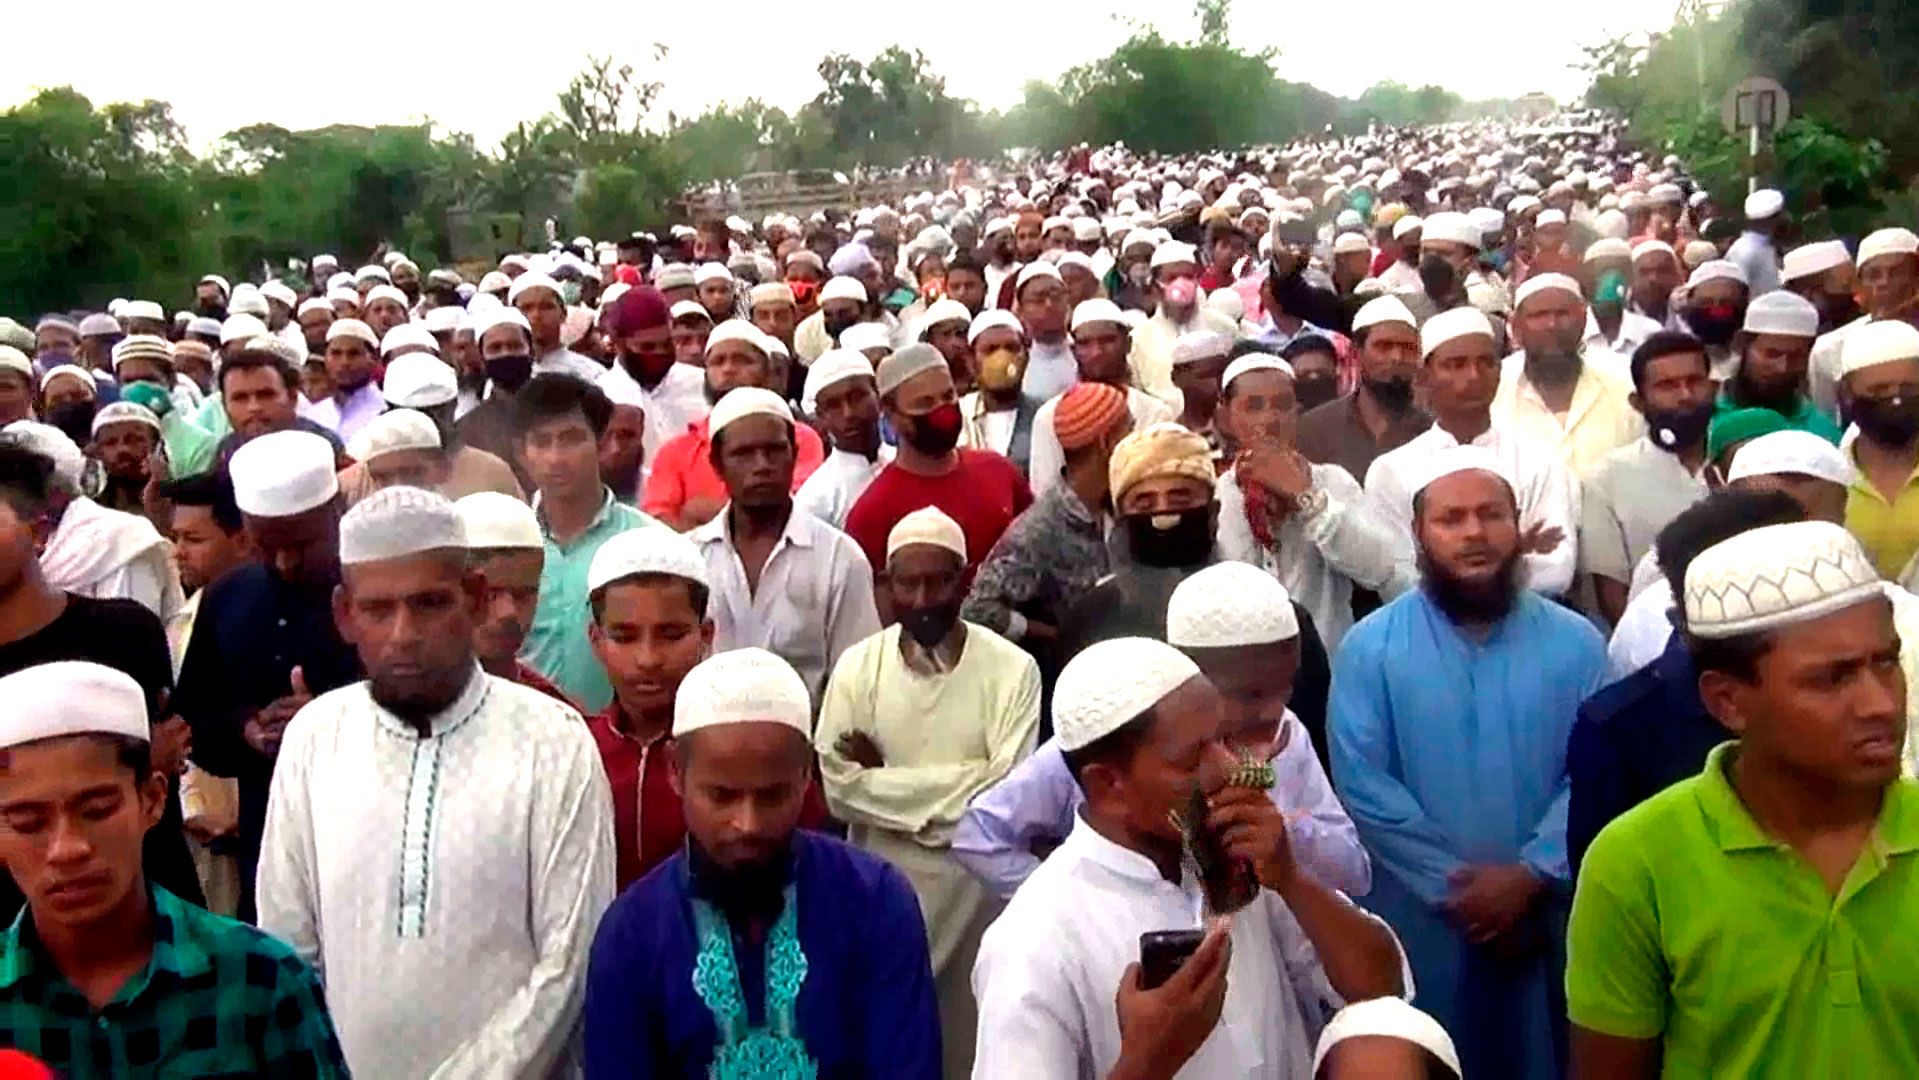 Thousands of Bangladeshi Muslims gather for the funeral of a popular Islamic preacher on Saturday, April 18, 2020.